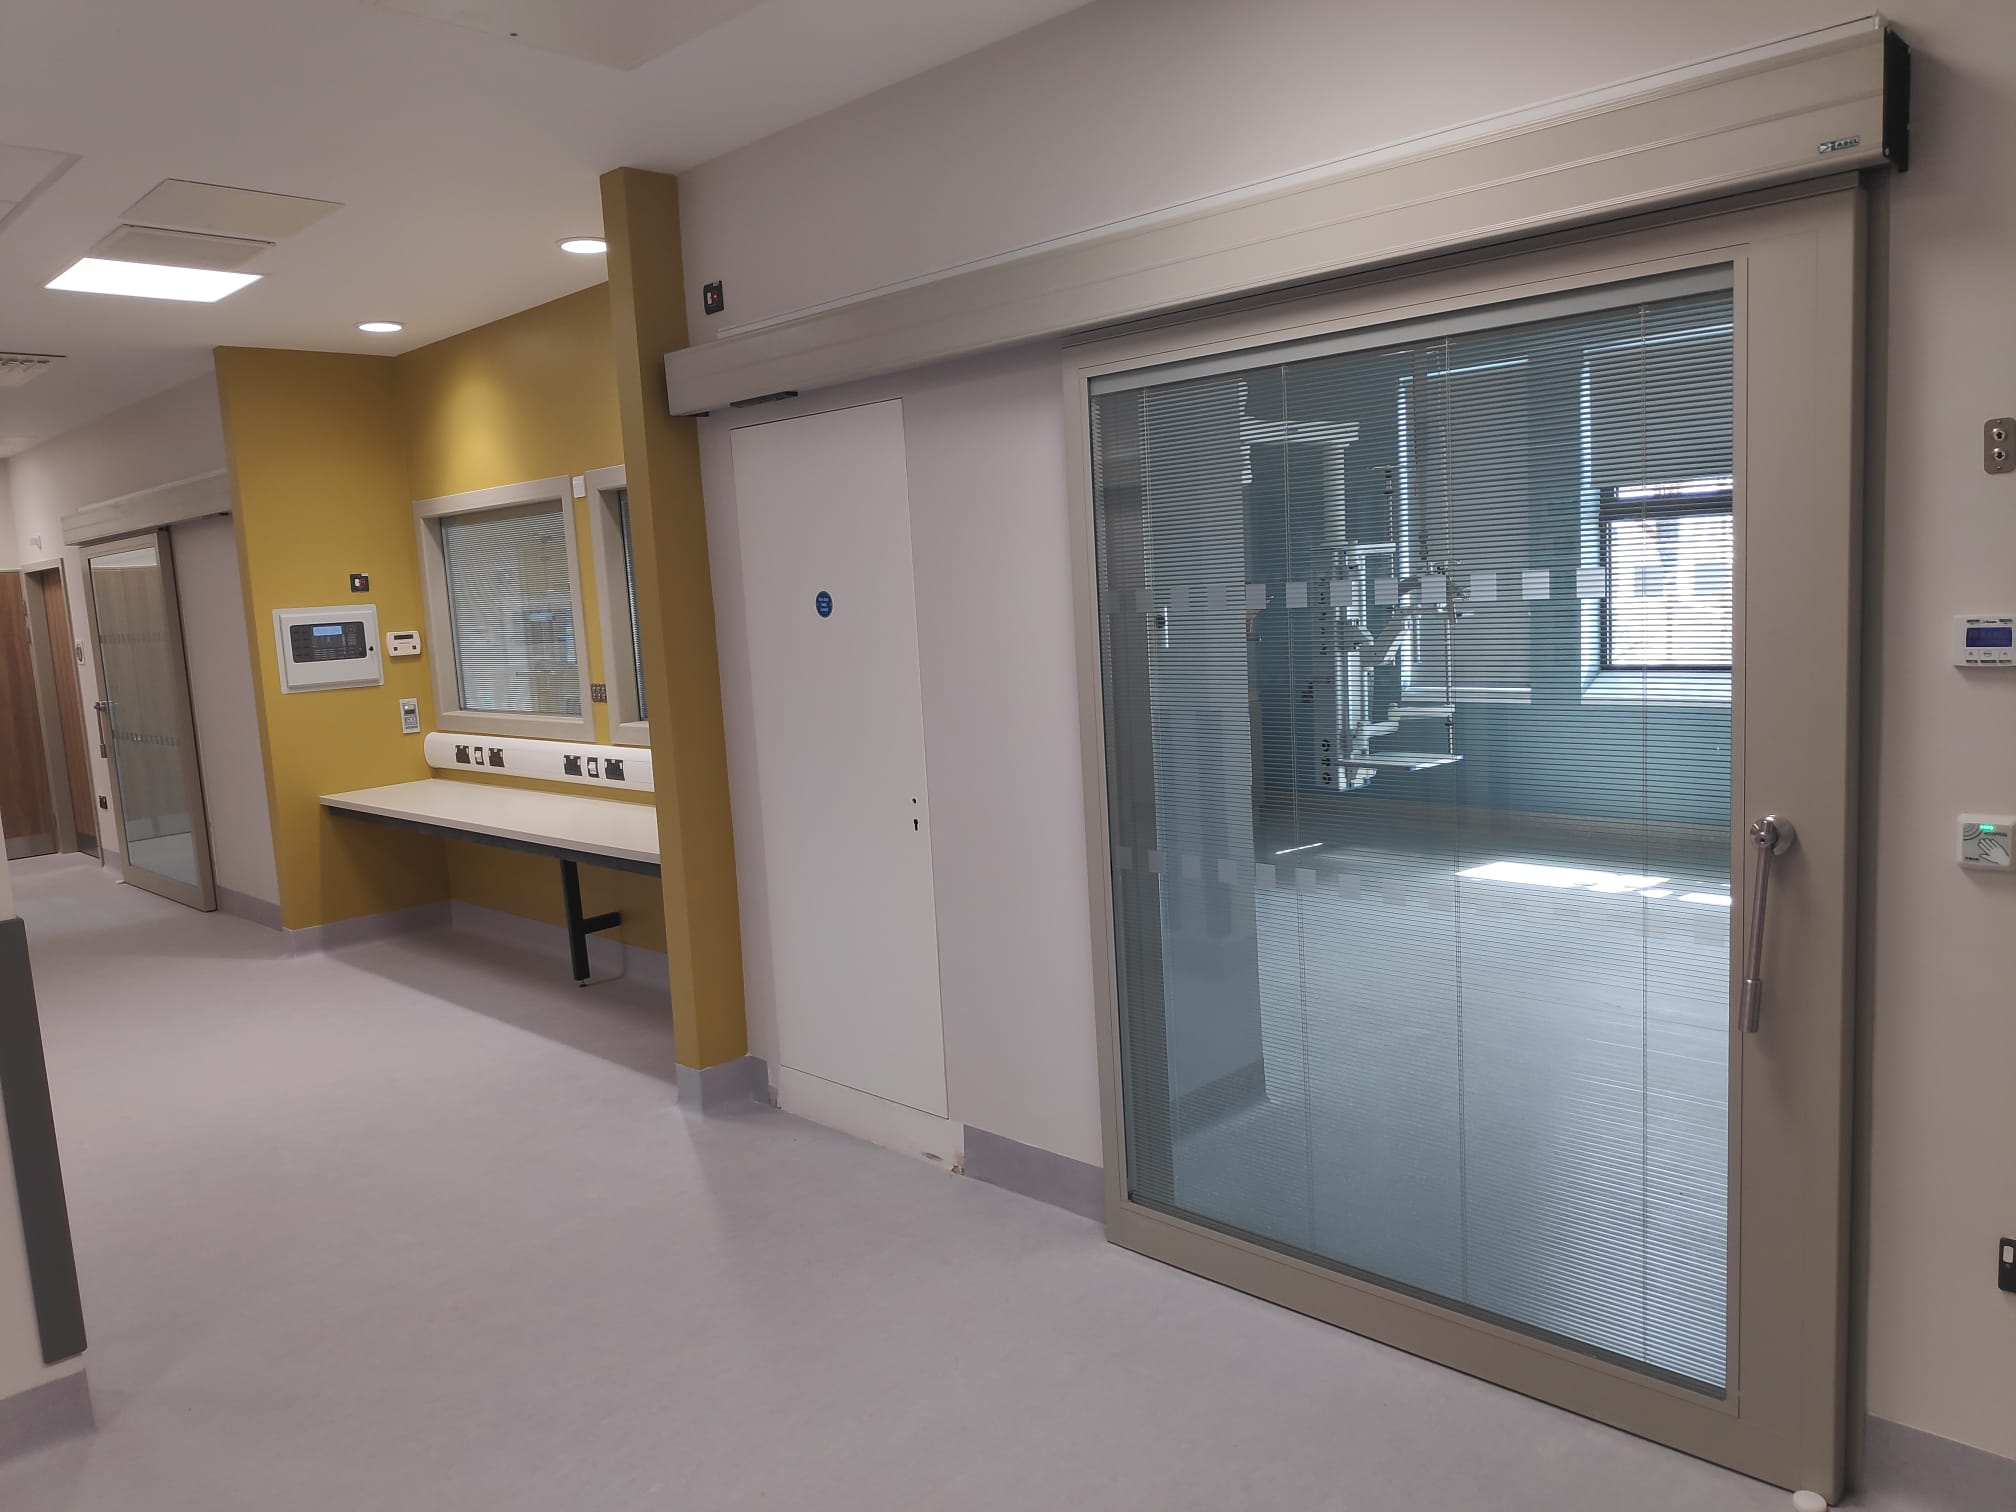 Hermetic Automatic Doors and Windows with Electric Blinds